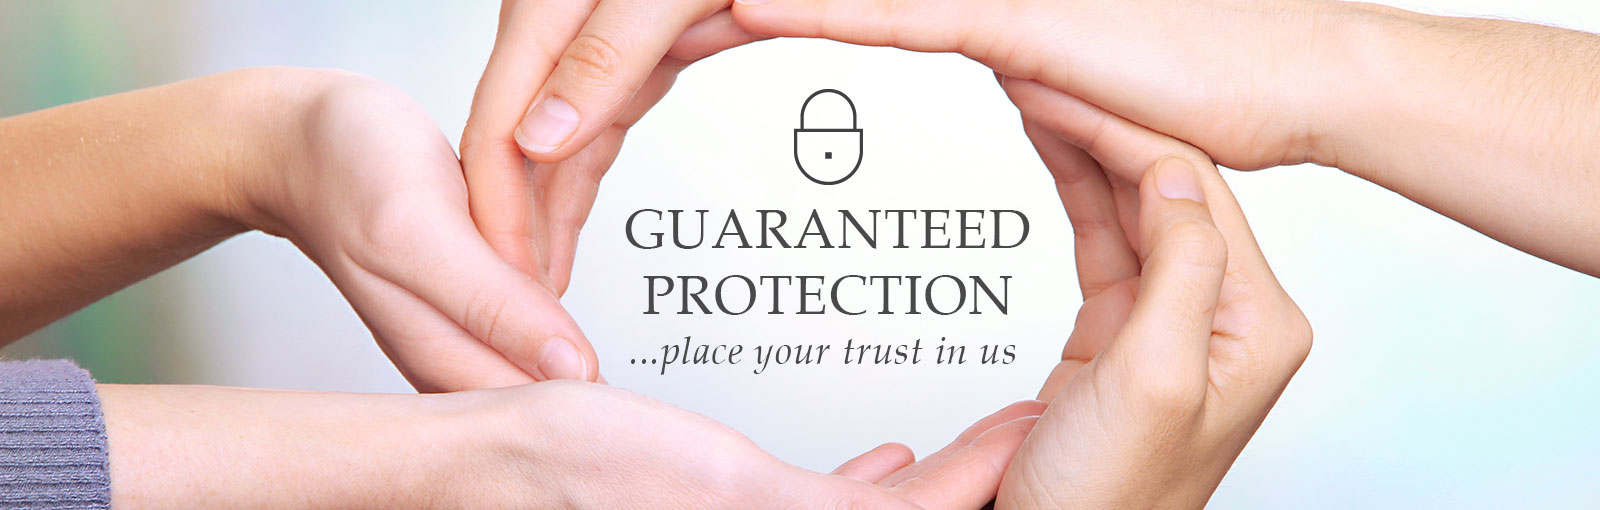 Guaranteed protection - place your trust in us